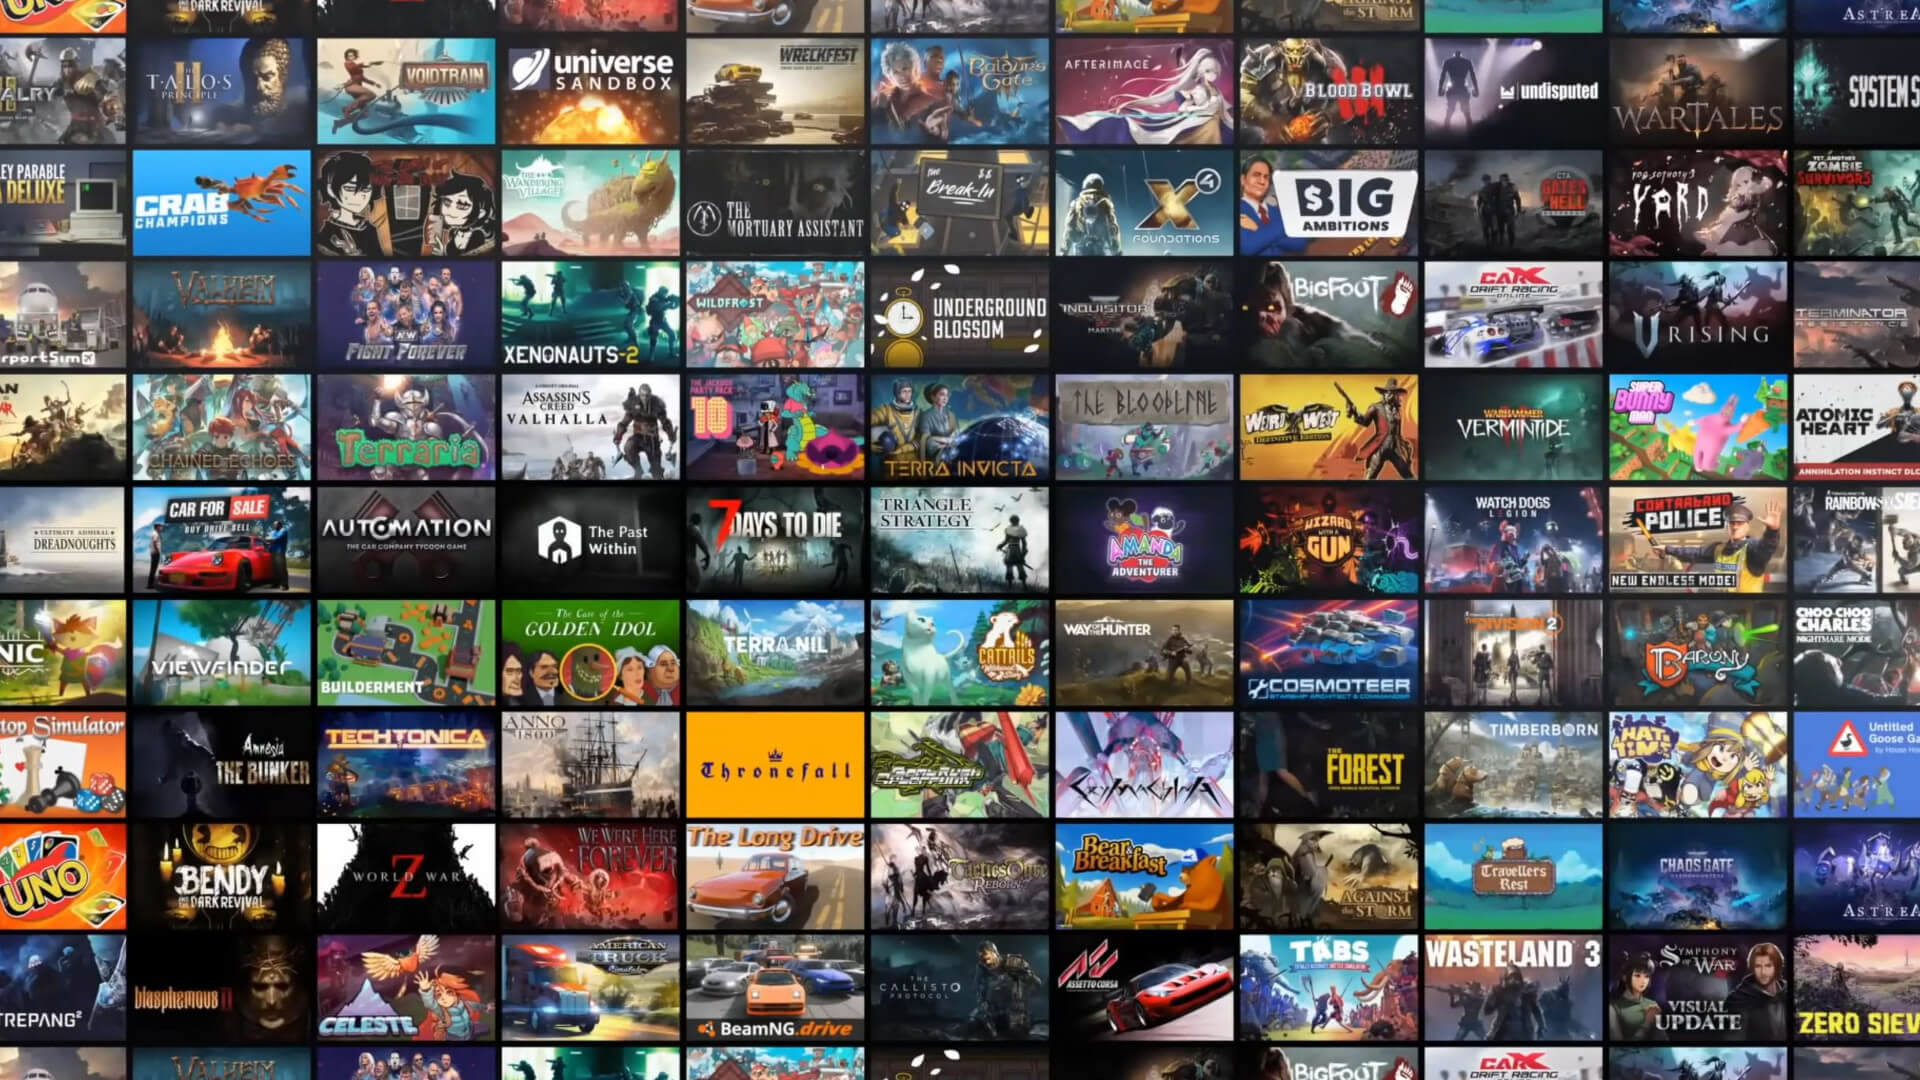 A tiled view of games on offer as part of a later Steam winter sale than the one mentioned in the story